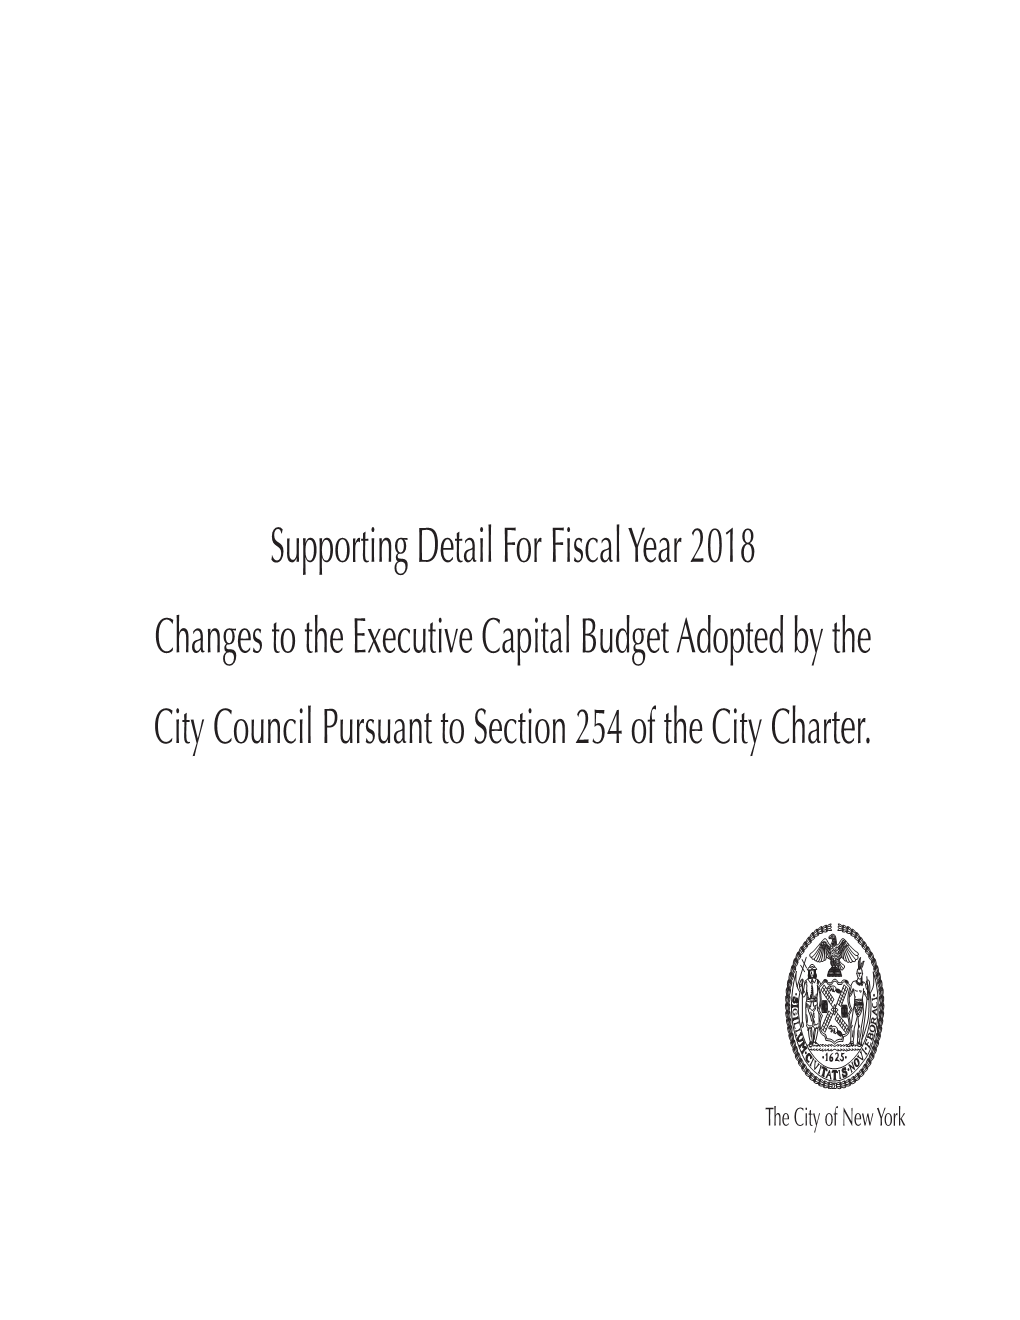 Supporting Detail for Fiscal Year 2018 Changes to the Executive Capital Budget Adopted by the City Council Pursuant to Section 254 of the City Charter